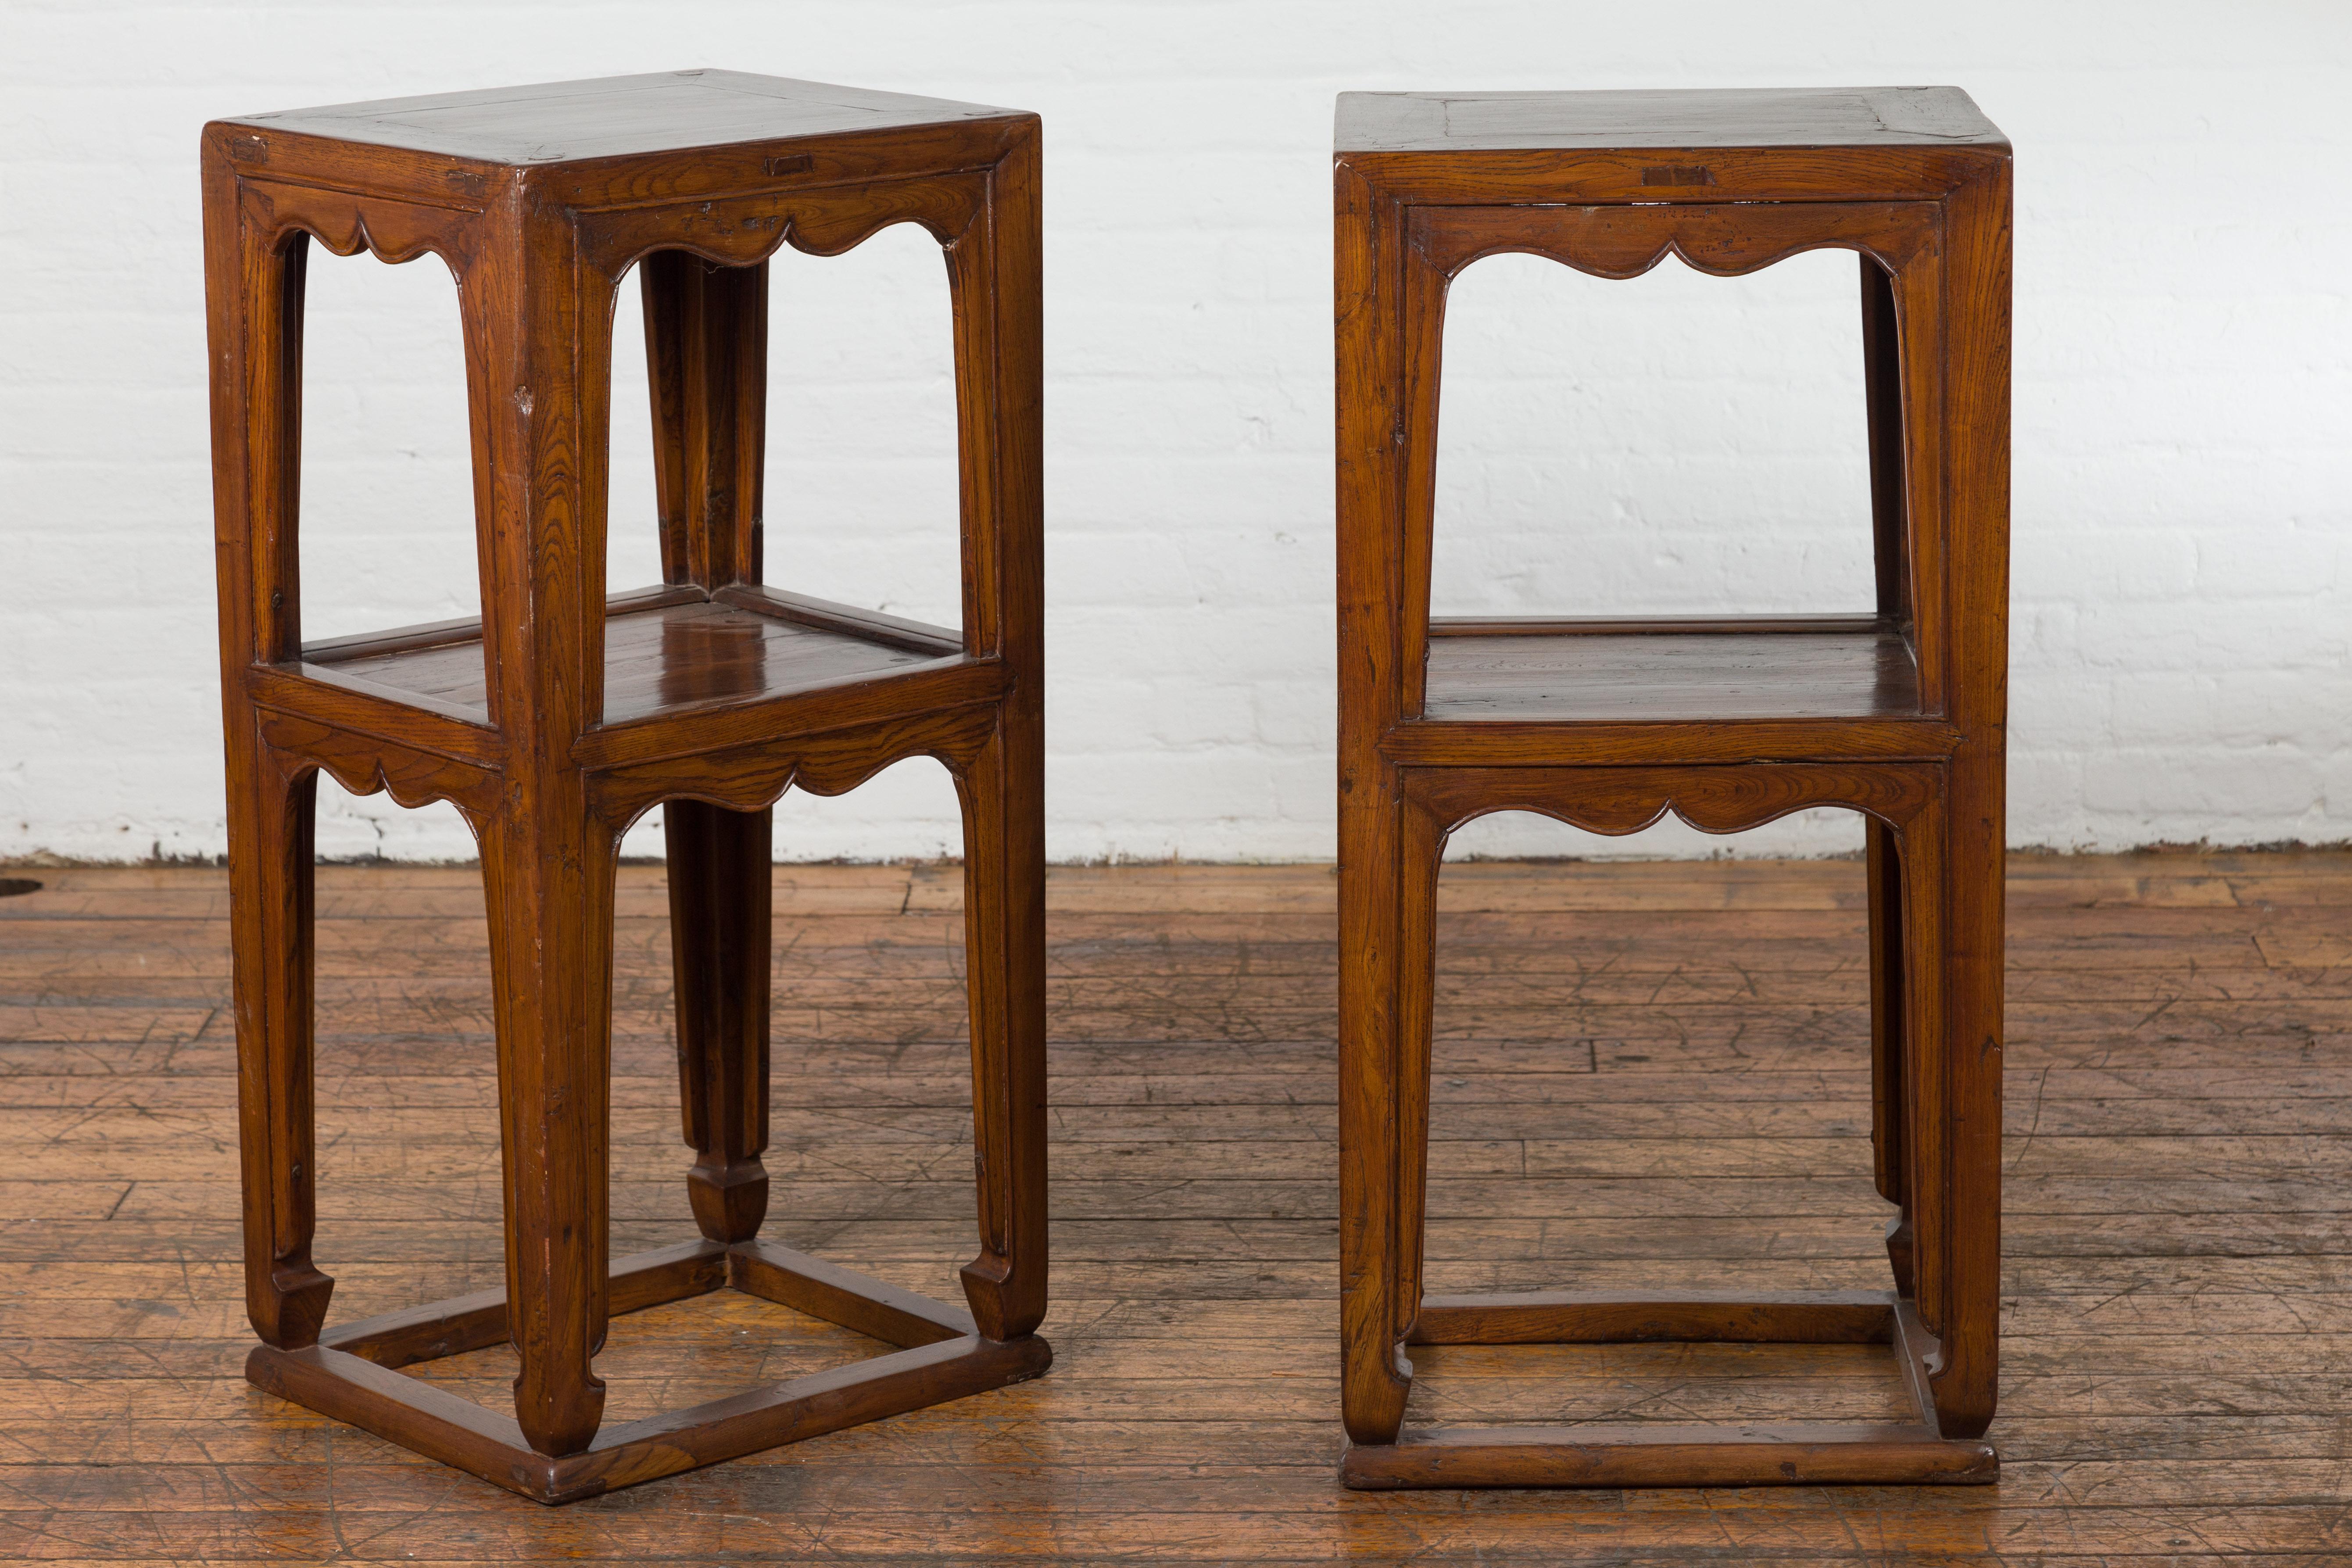 A pair of late Qing Dynasty period tiered lamp tables from the early 20th century, with carved aprons, shelves, horse hoof feet and low stretchers. Created in China during the late Qing Dynasty period in the early years of the 20th century, this